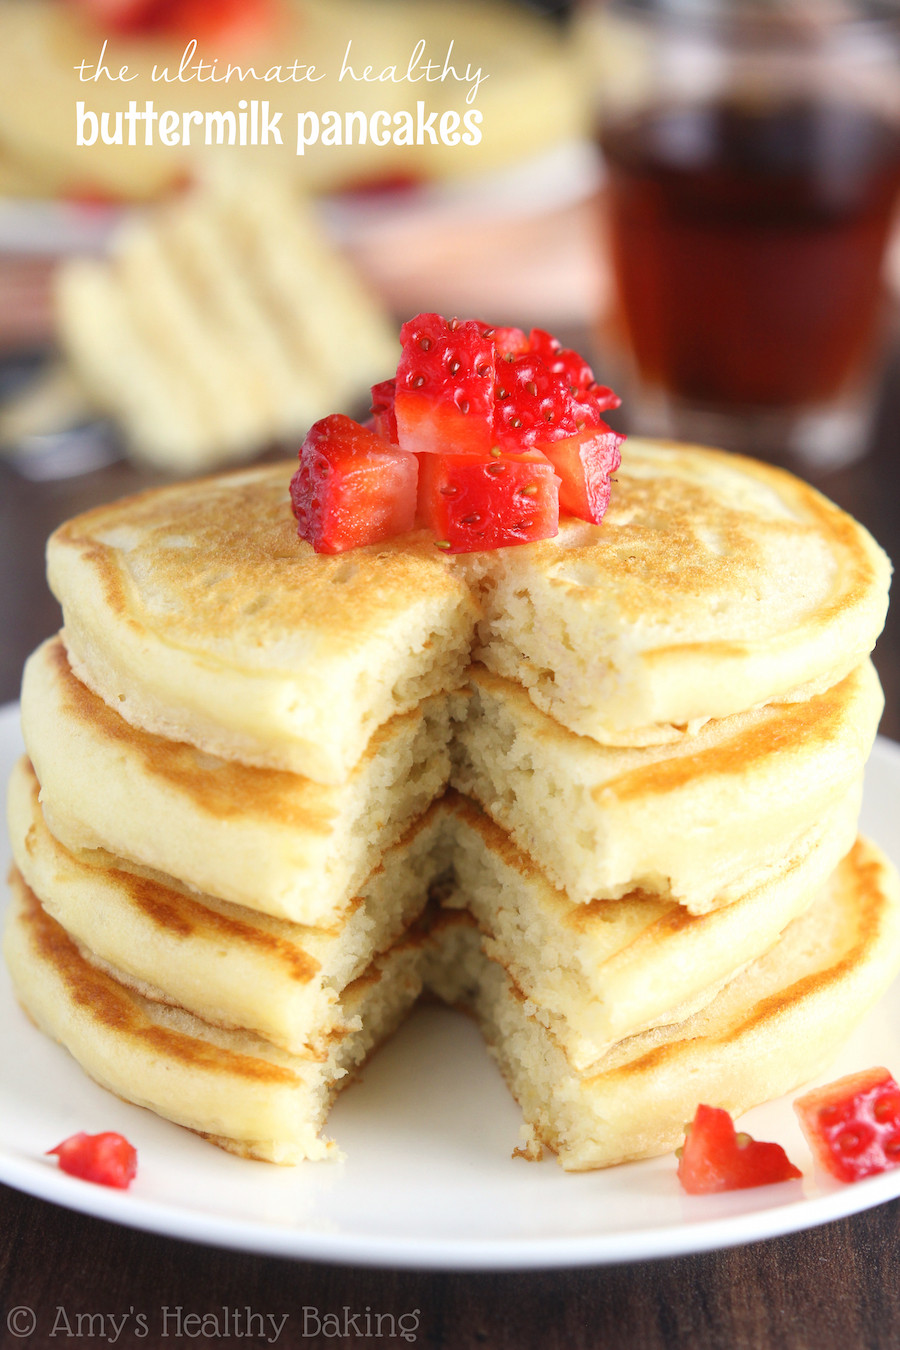 Healthy Homemade Pancakes the top 20 Ideas About the Ultimate Healthy buttermilk Pancakes